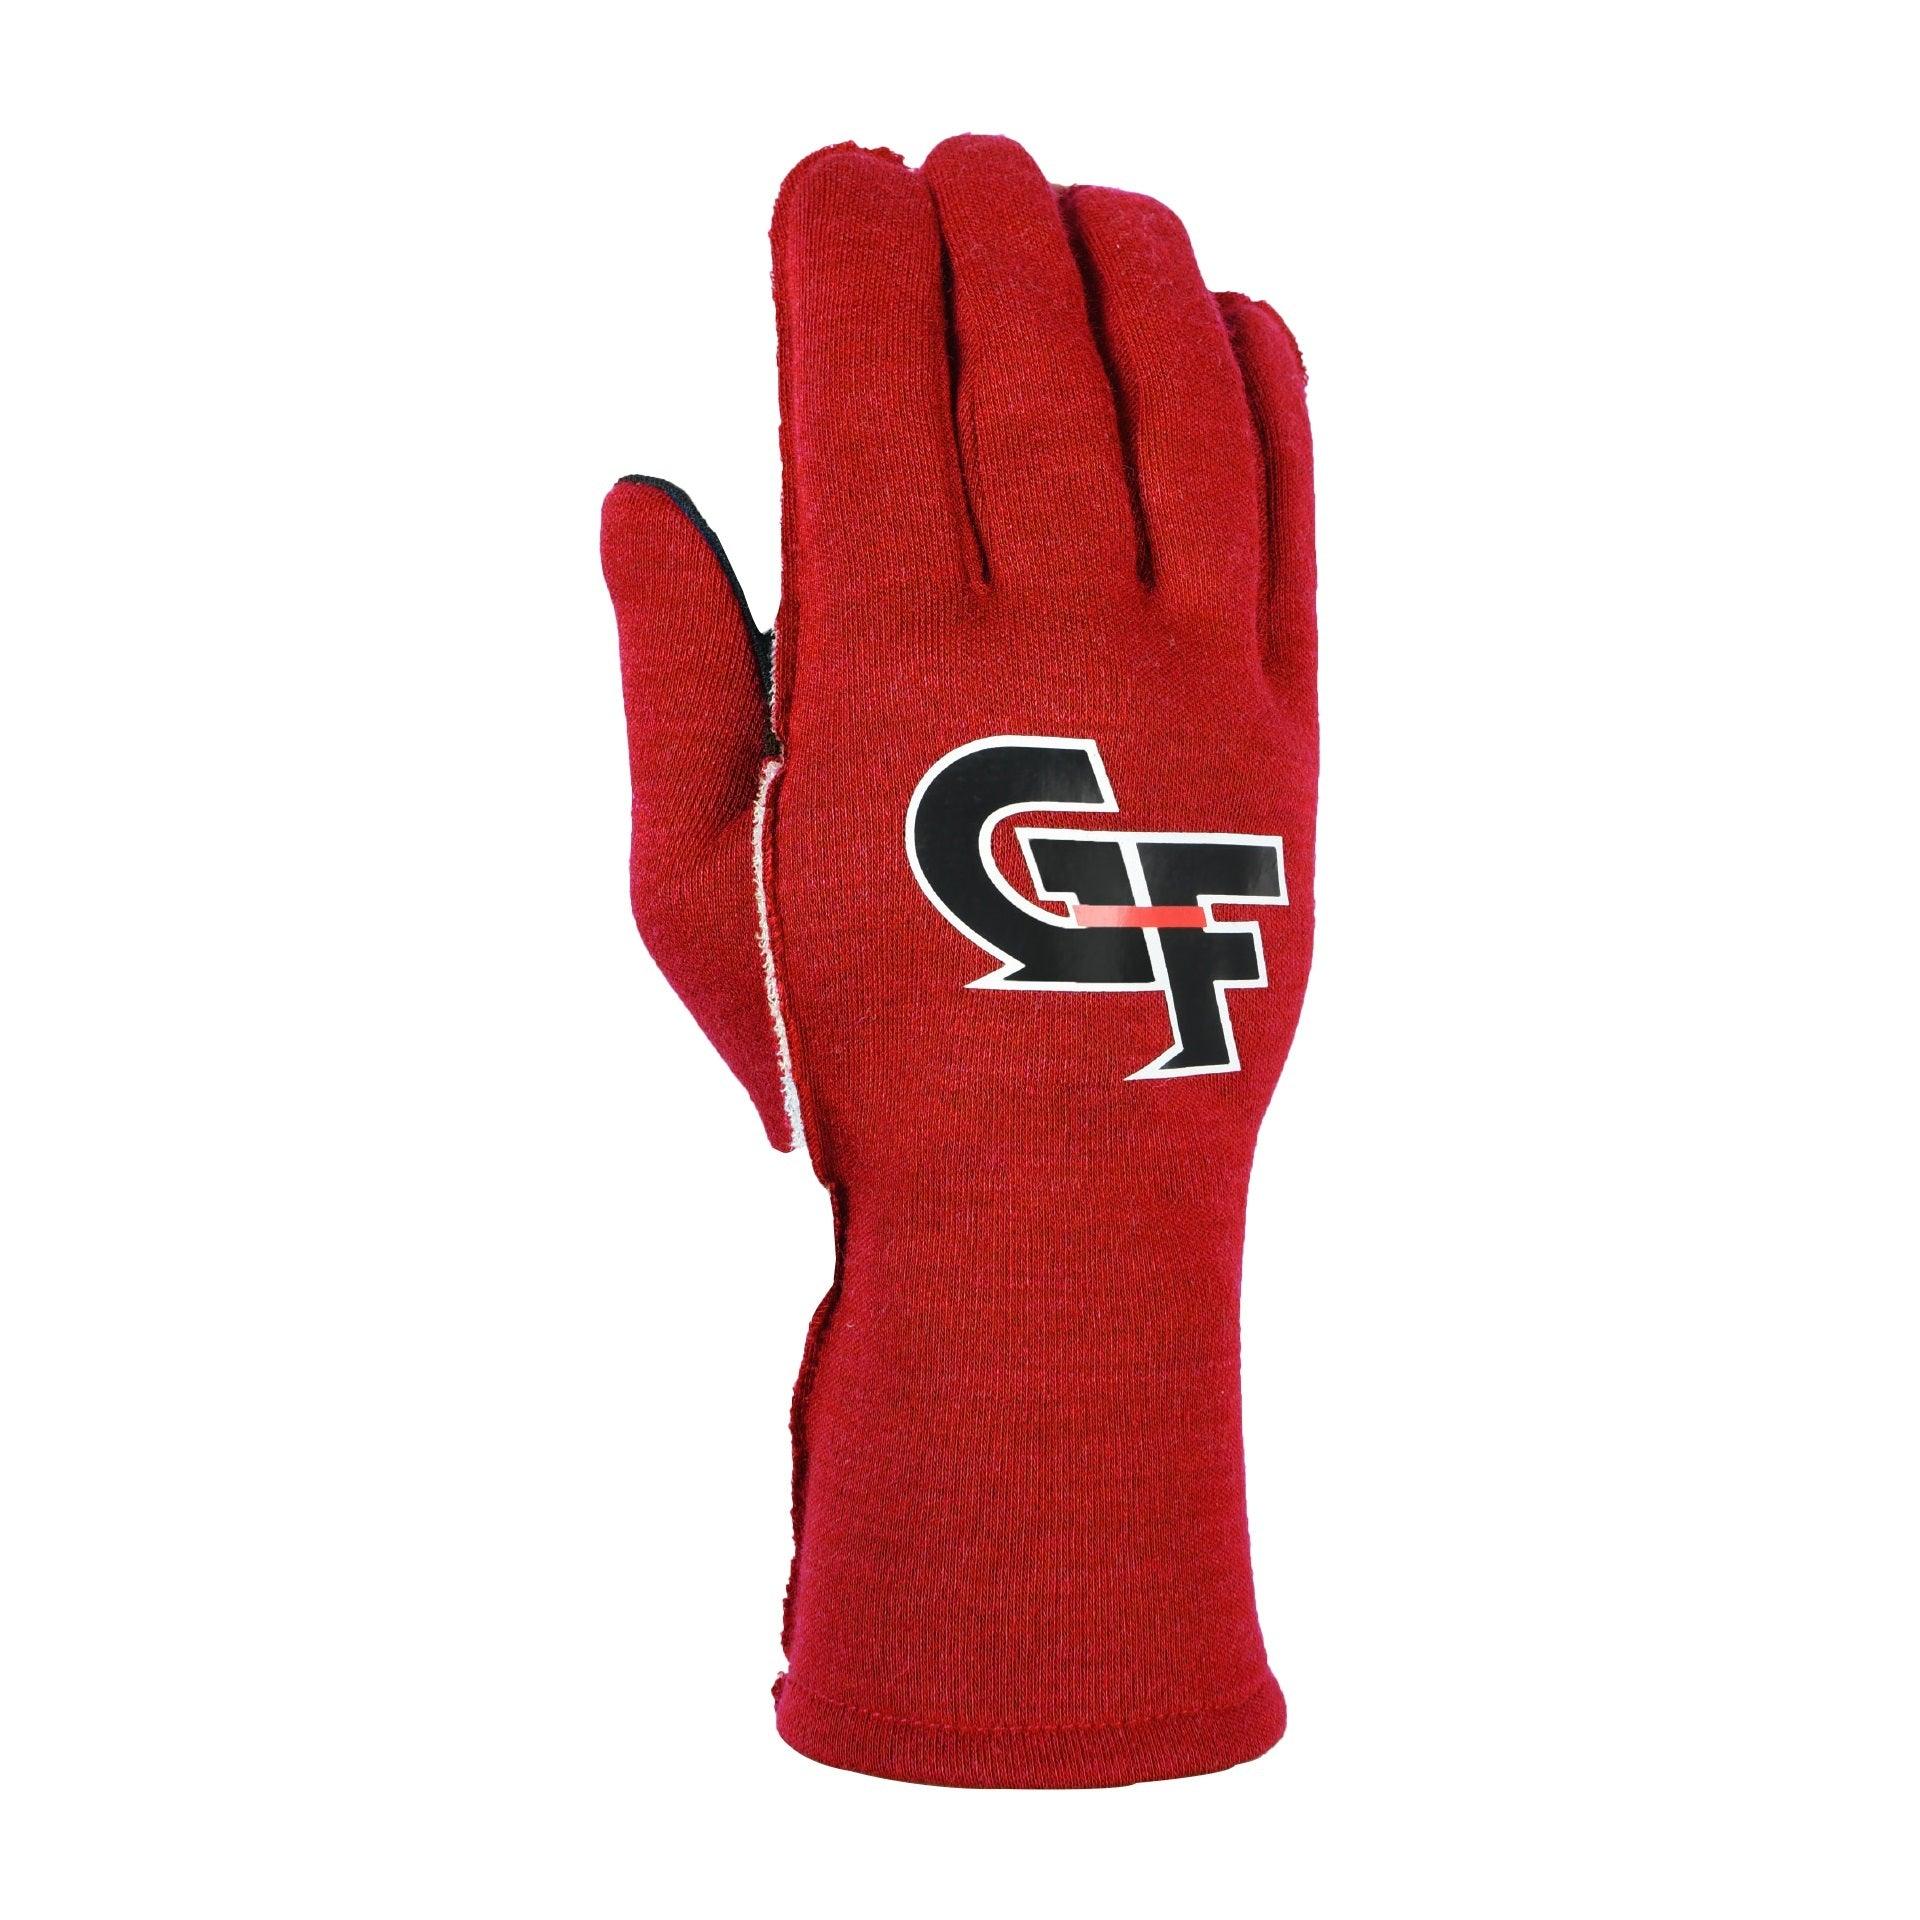 Gloves G-Limit Small Red - Burlile Performance Products